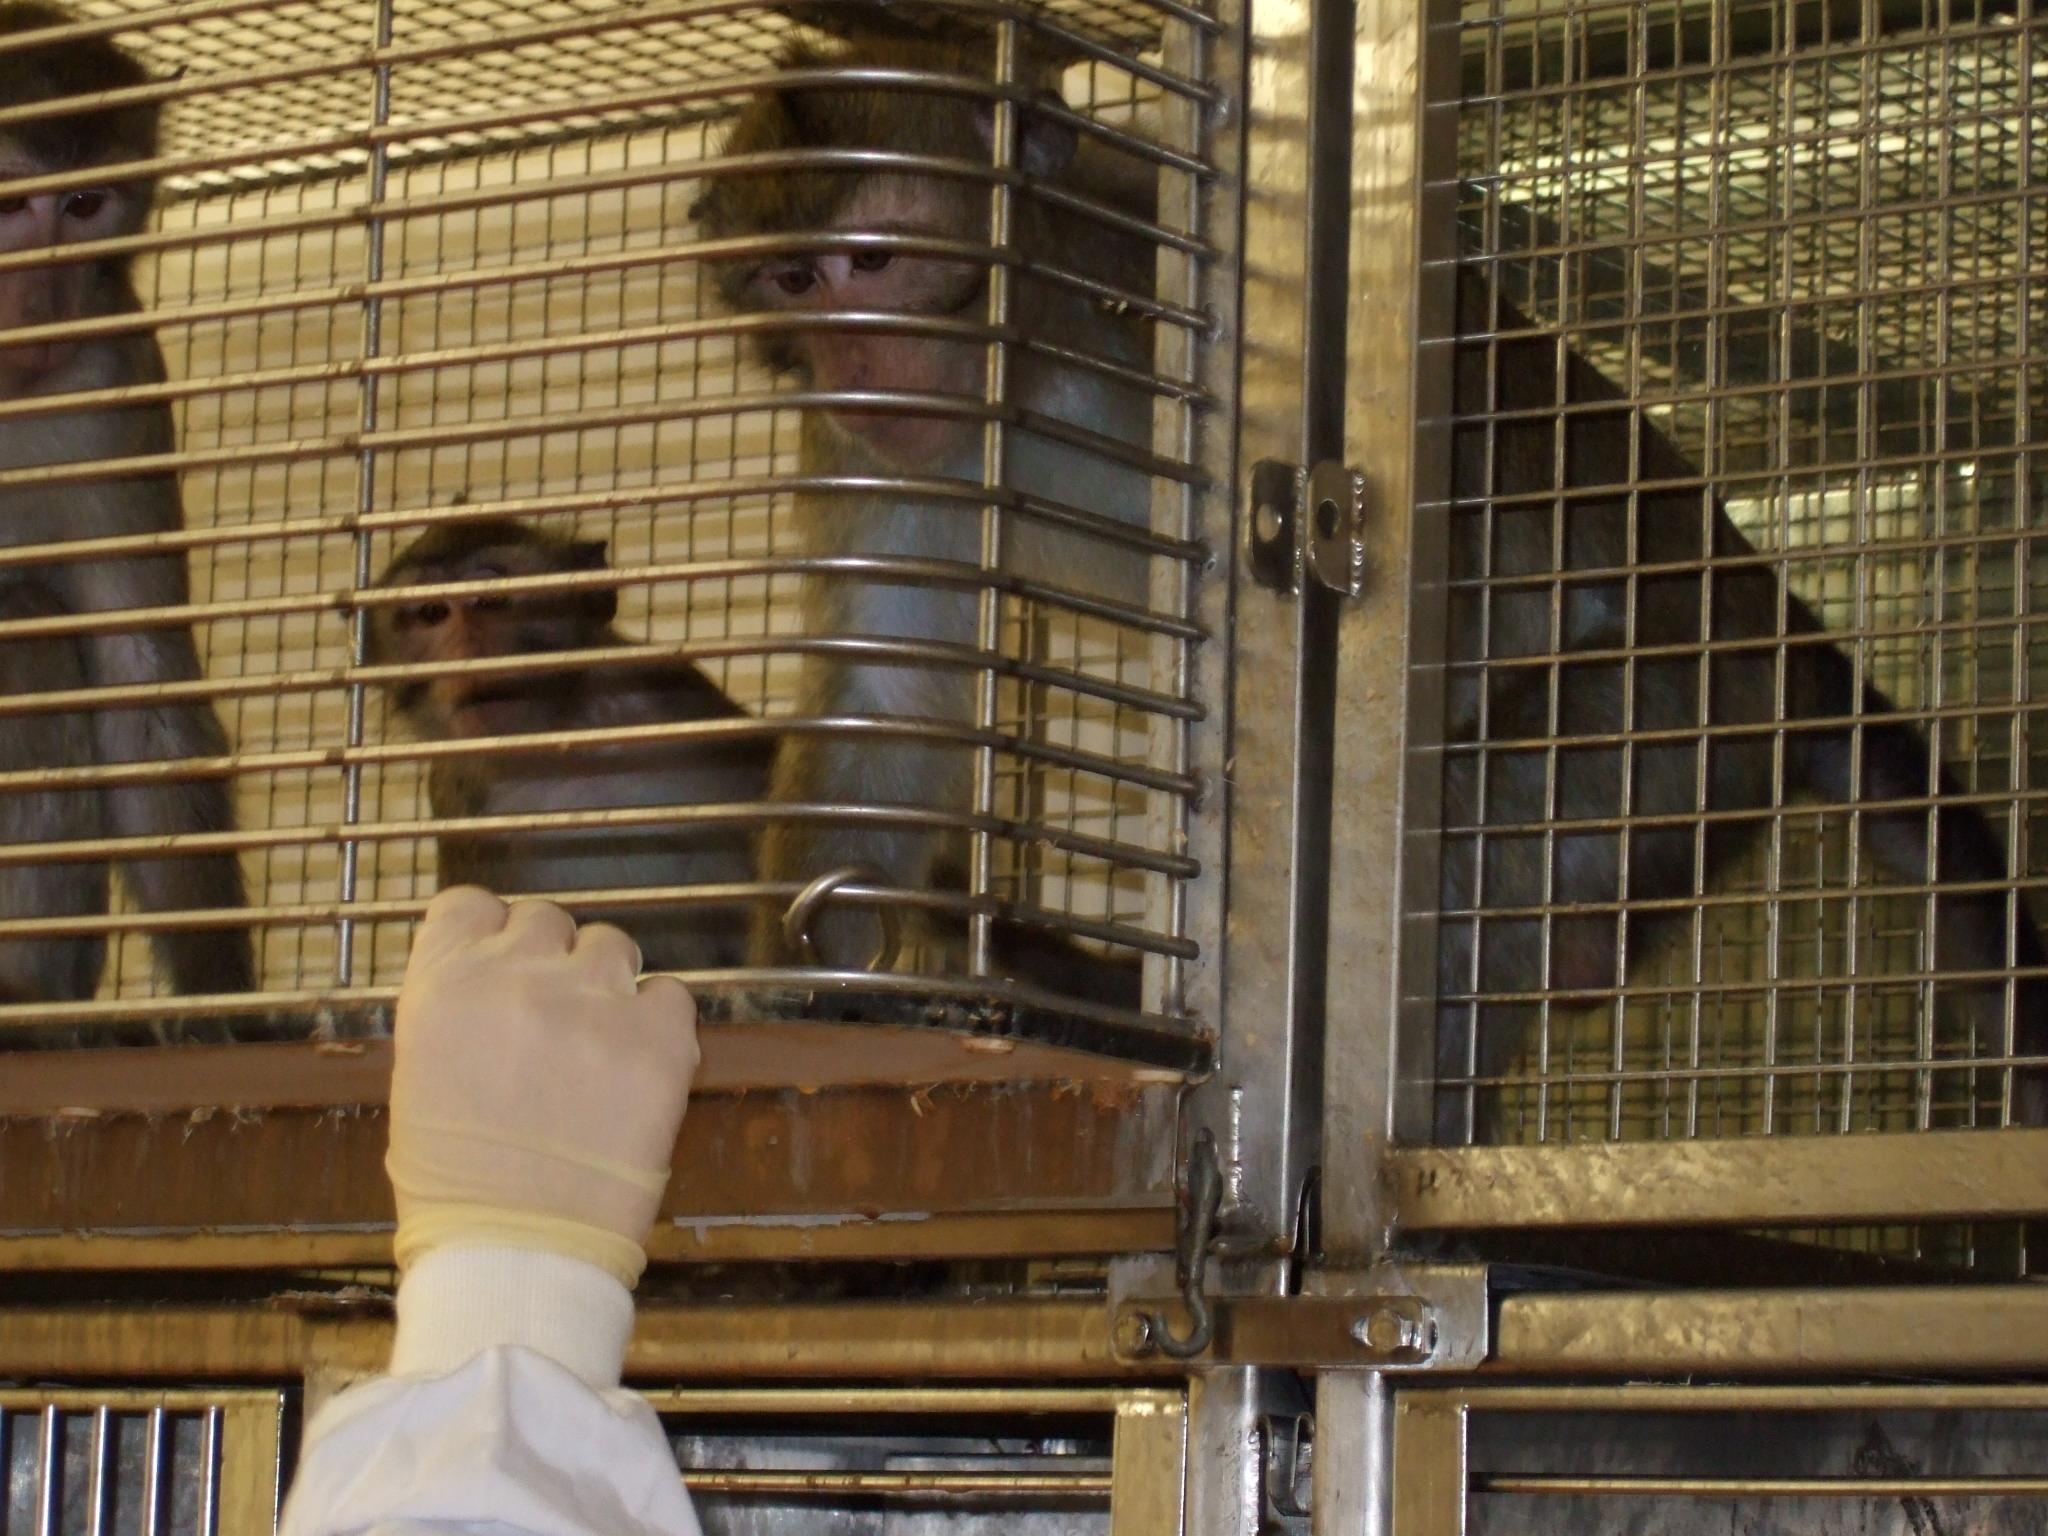 A macaque receiving a food reward to positioning itself in a desired location within the cage